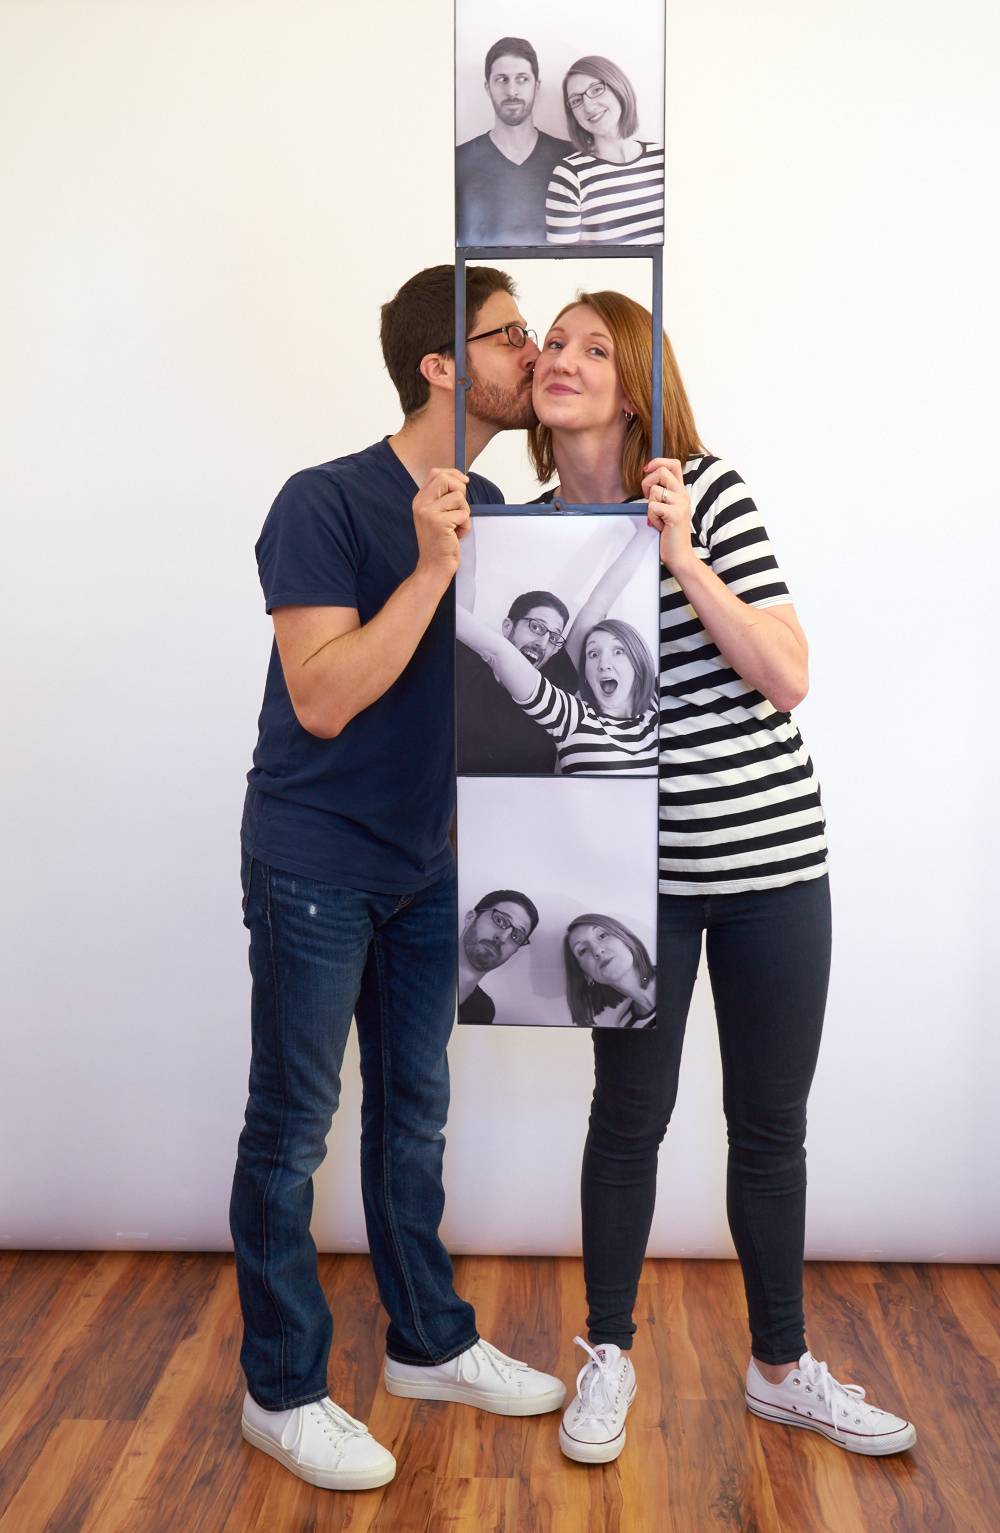 The classic costume that you can pull together in only a few hours. We made a life-size couple's photo booth costume that is as easy to do as it is charming. Read on to find out how.